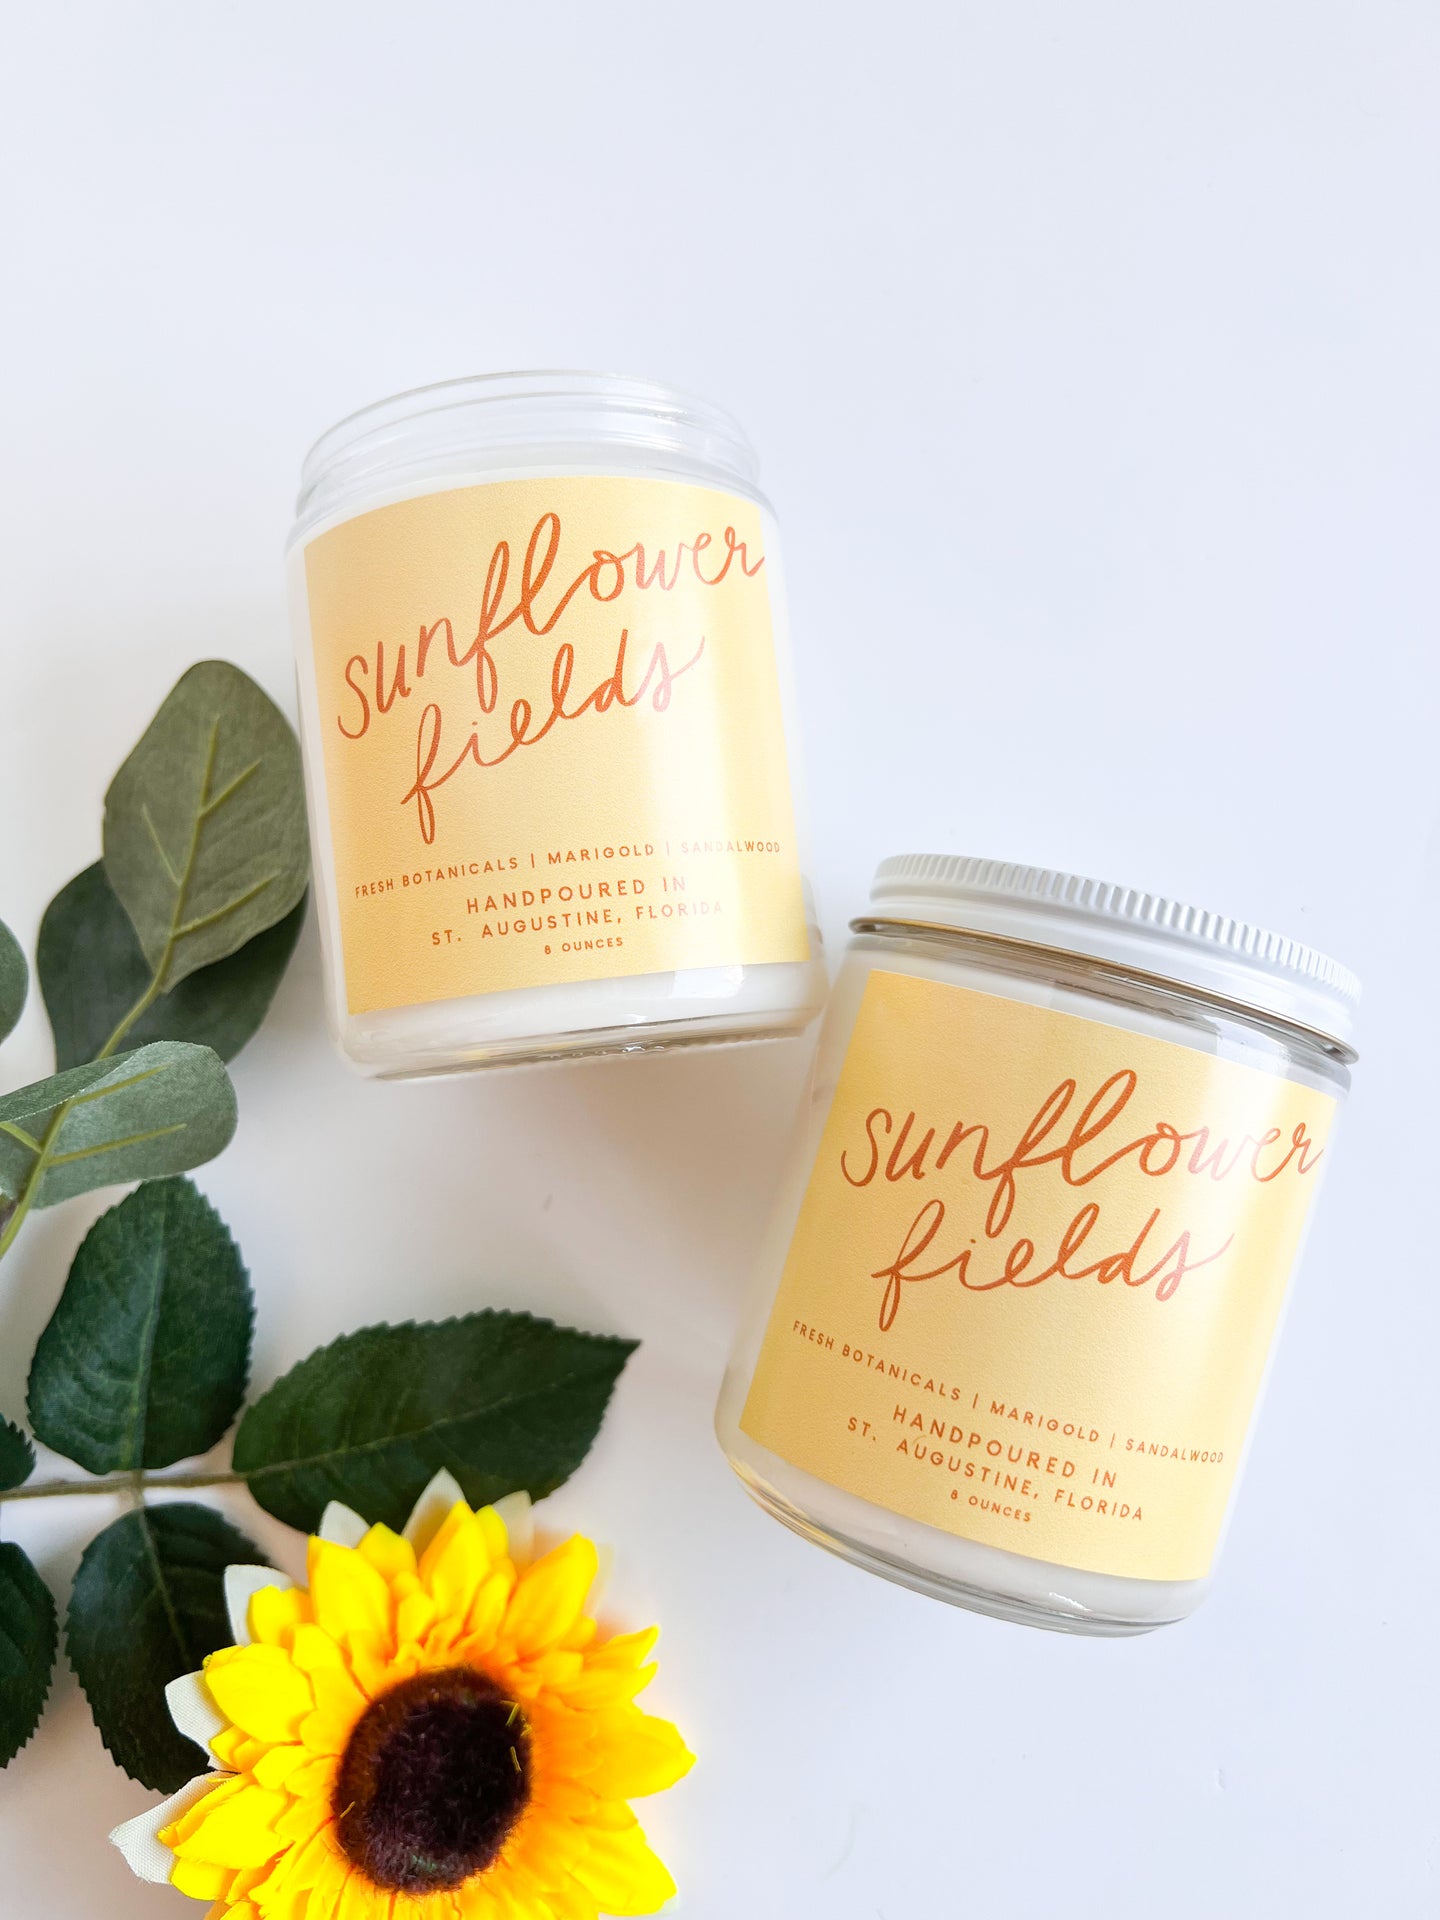 Sunflower Fields: 8 oz Soy Wax Hand-Poured Candle